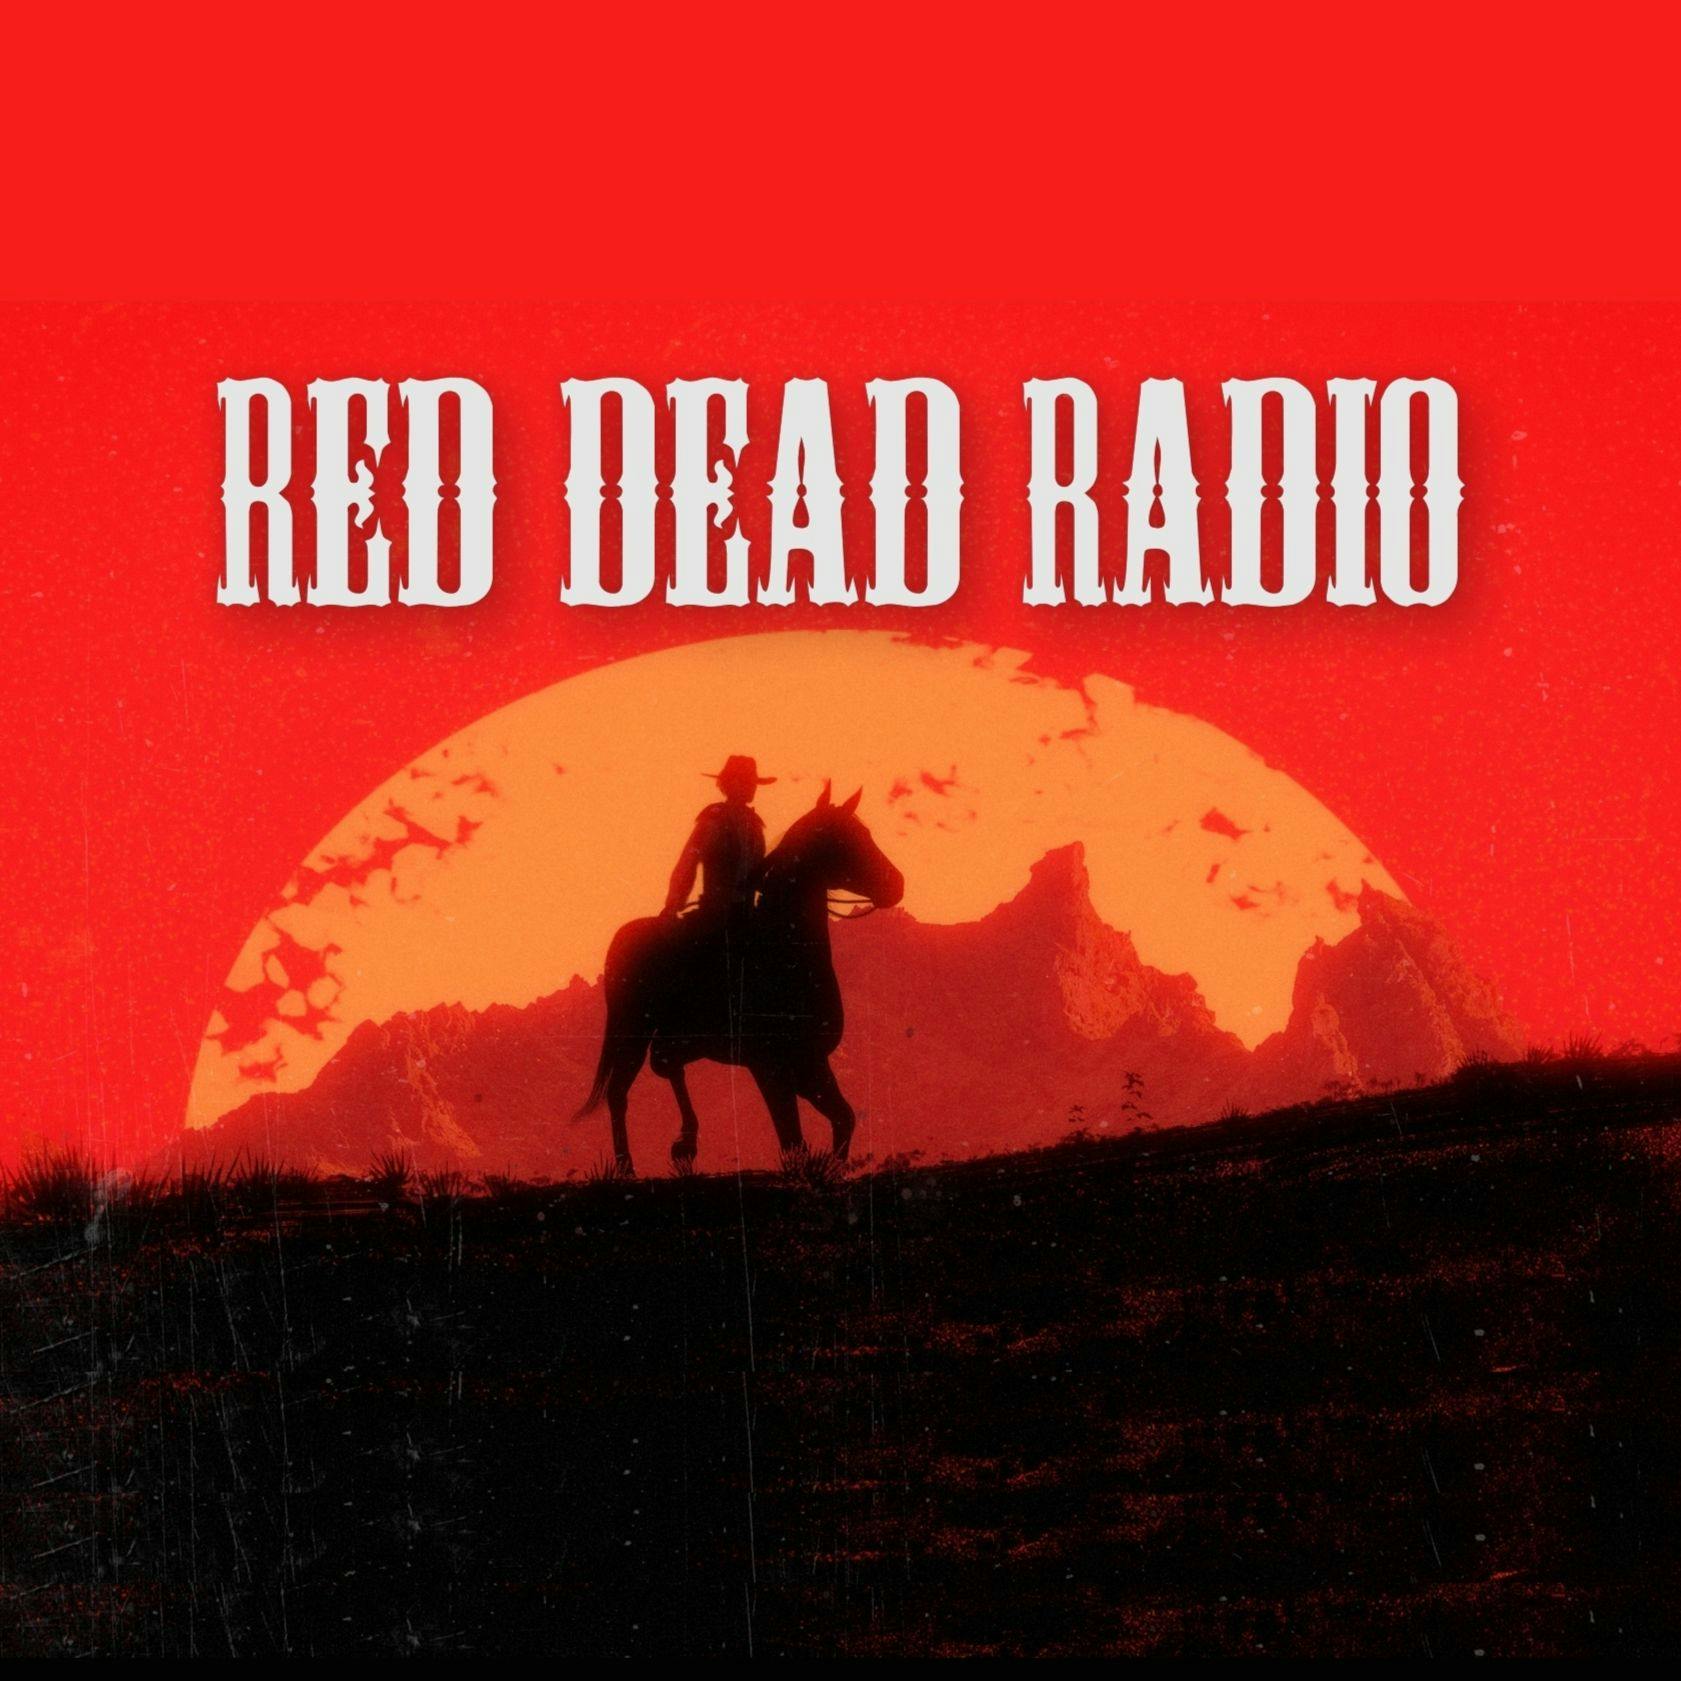 Red Dead Redemption 2: Why We Love It (No Spoilers): Red Dead Radio Ep. 28